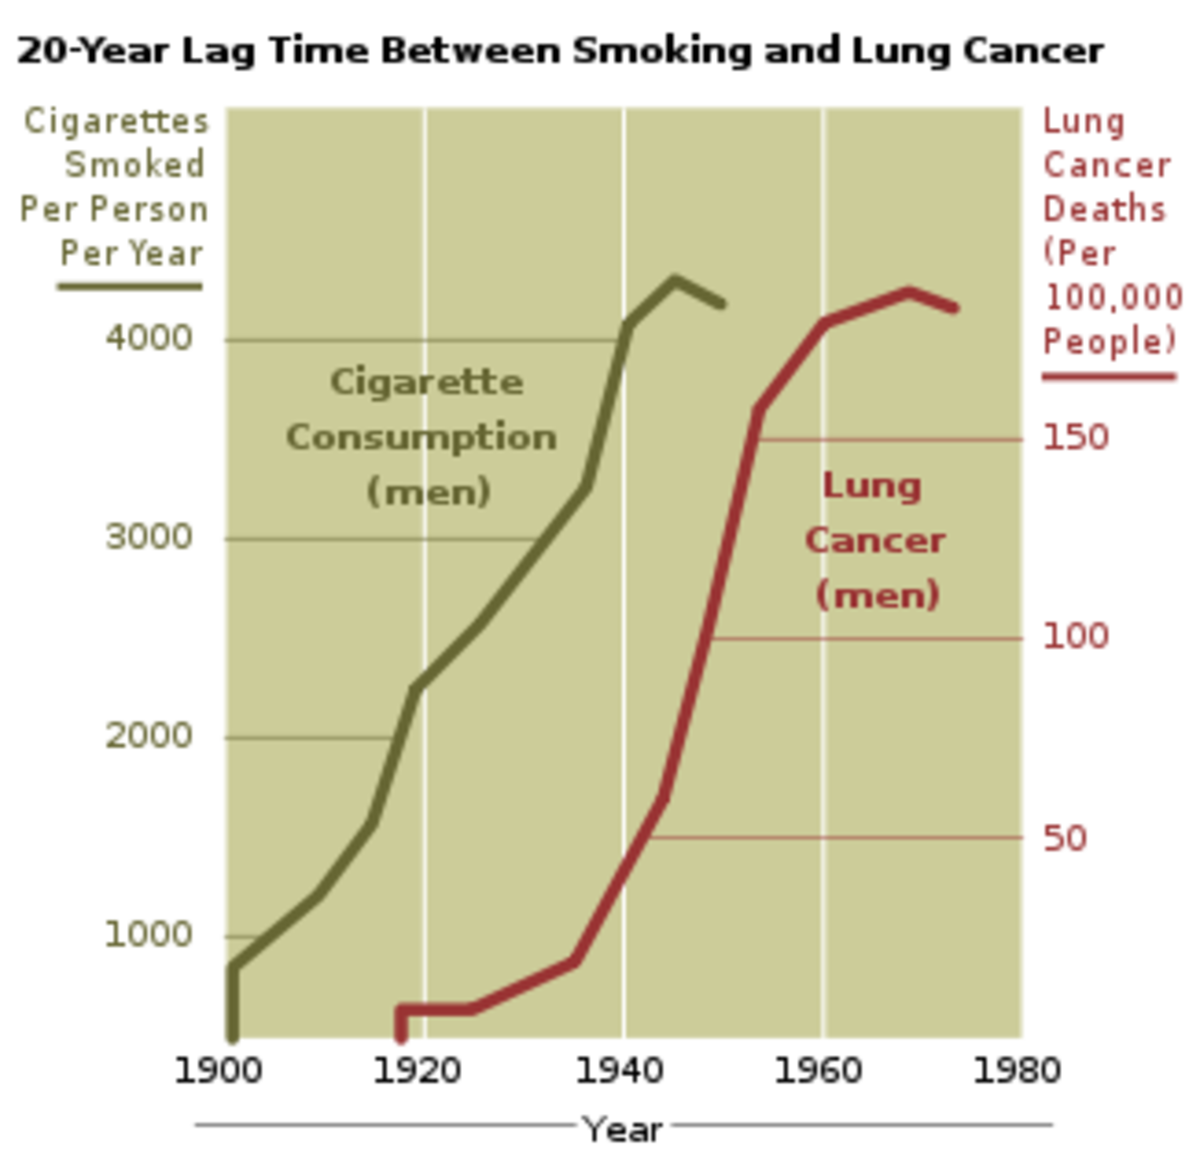 Smoking has a high correlation with lung cancer in males. 